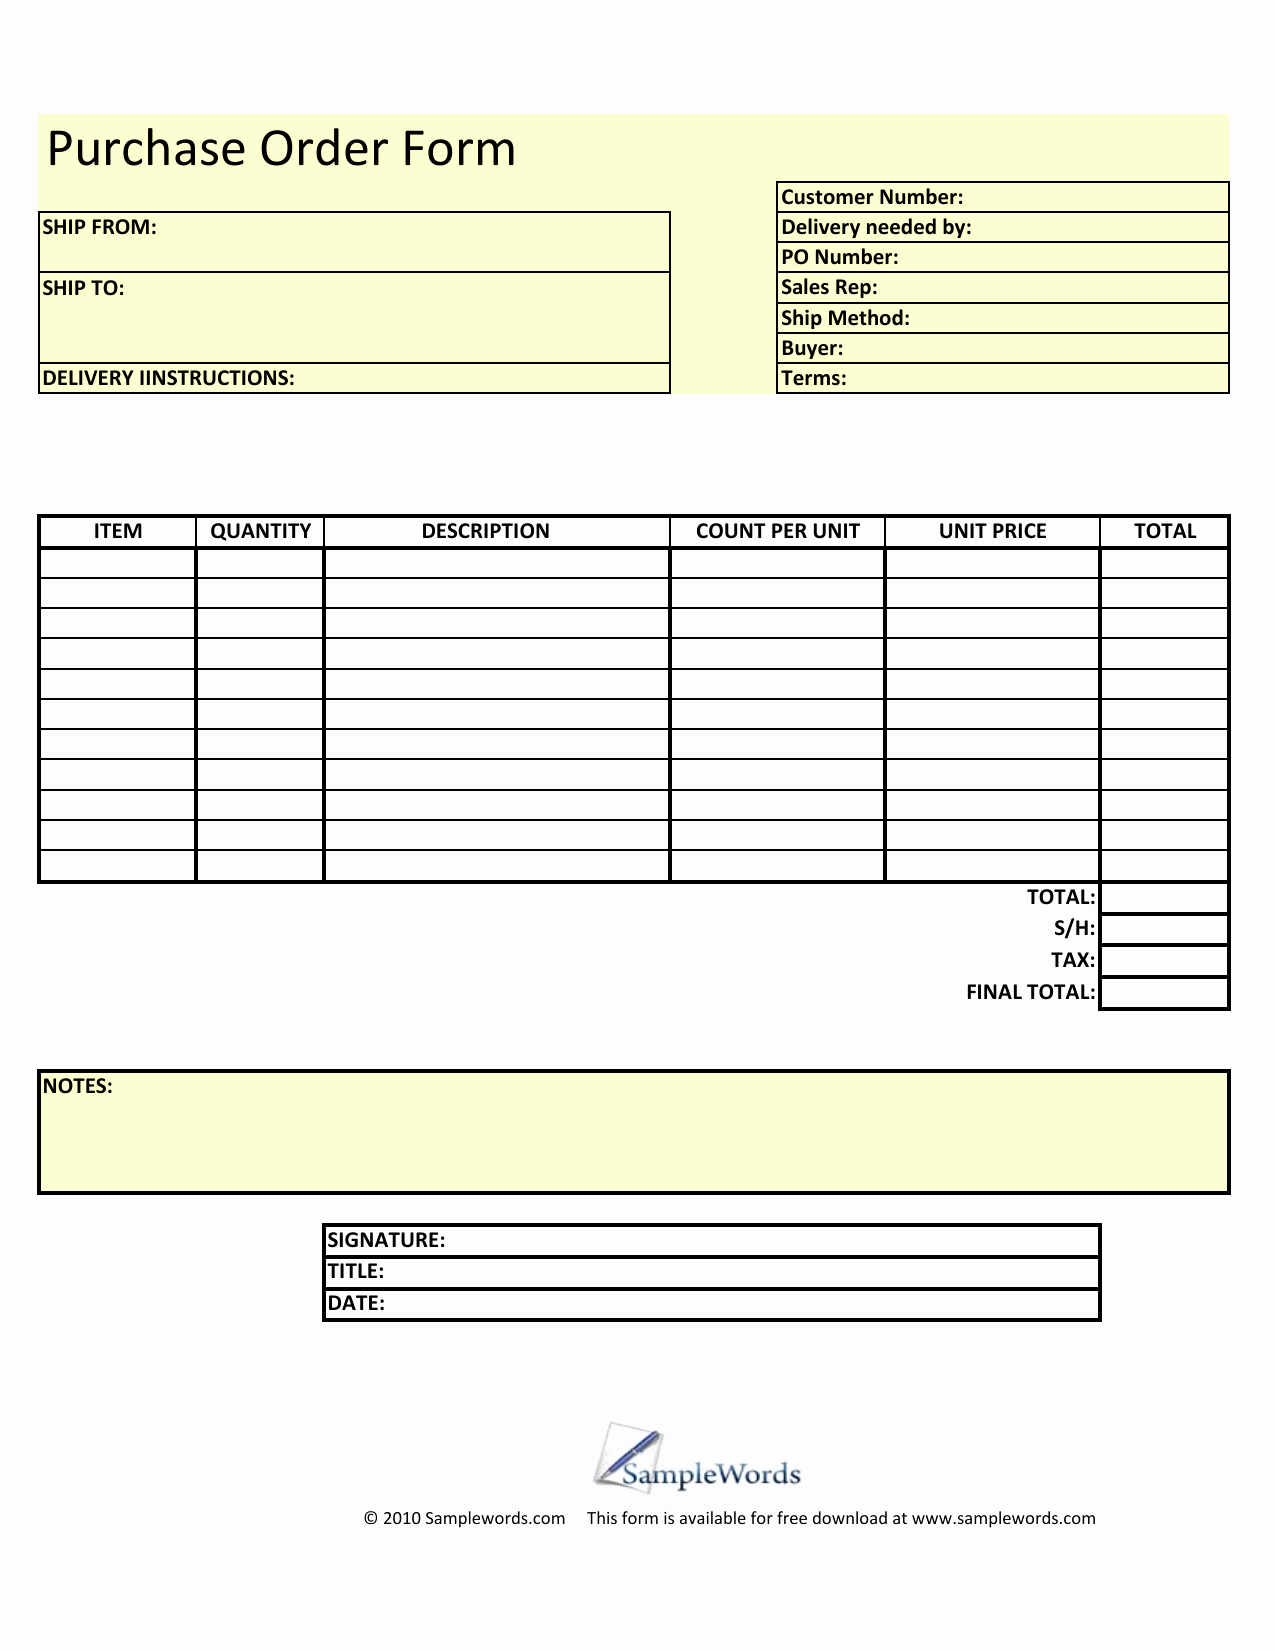 Download Blank Purchase order form Template Excel